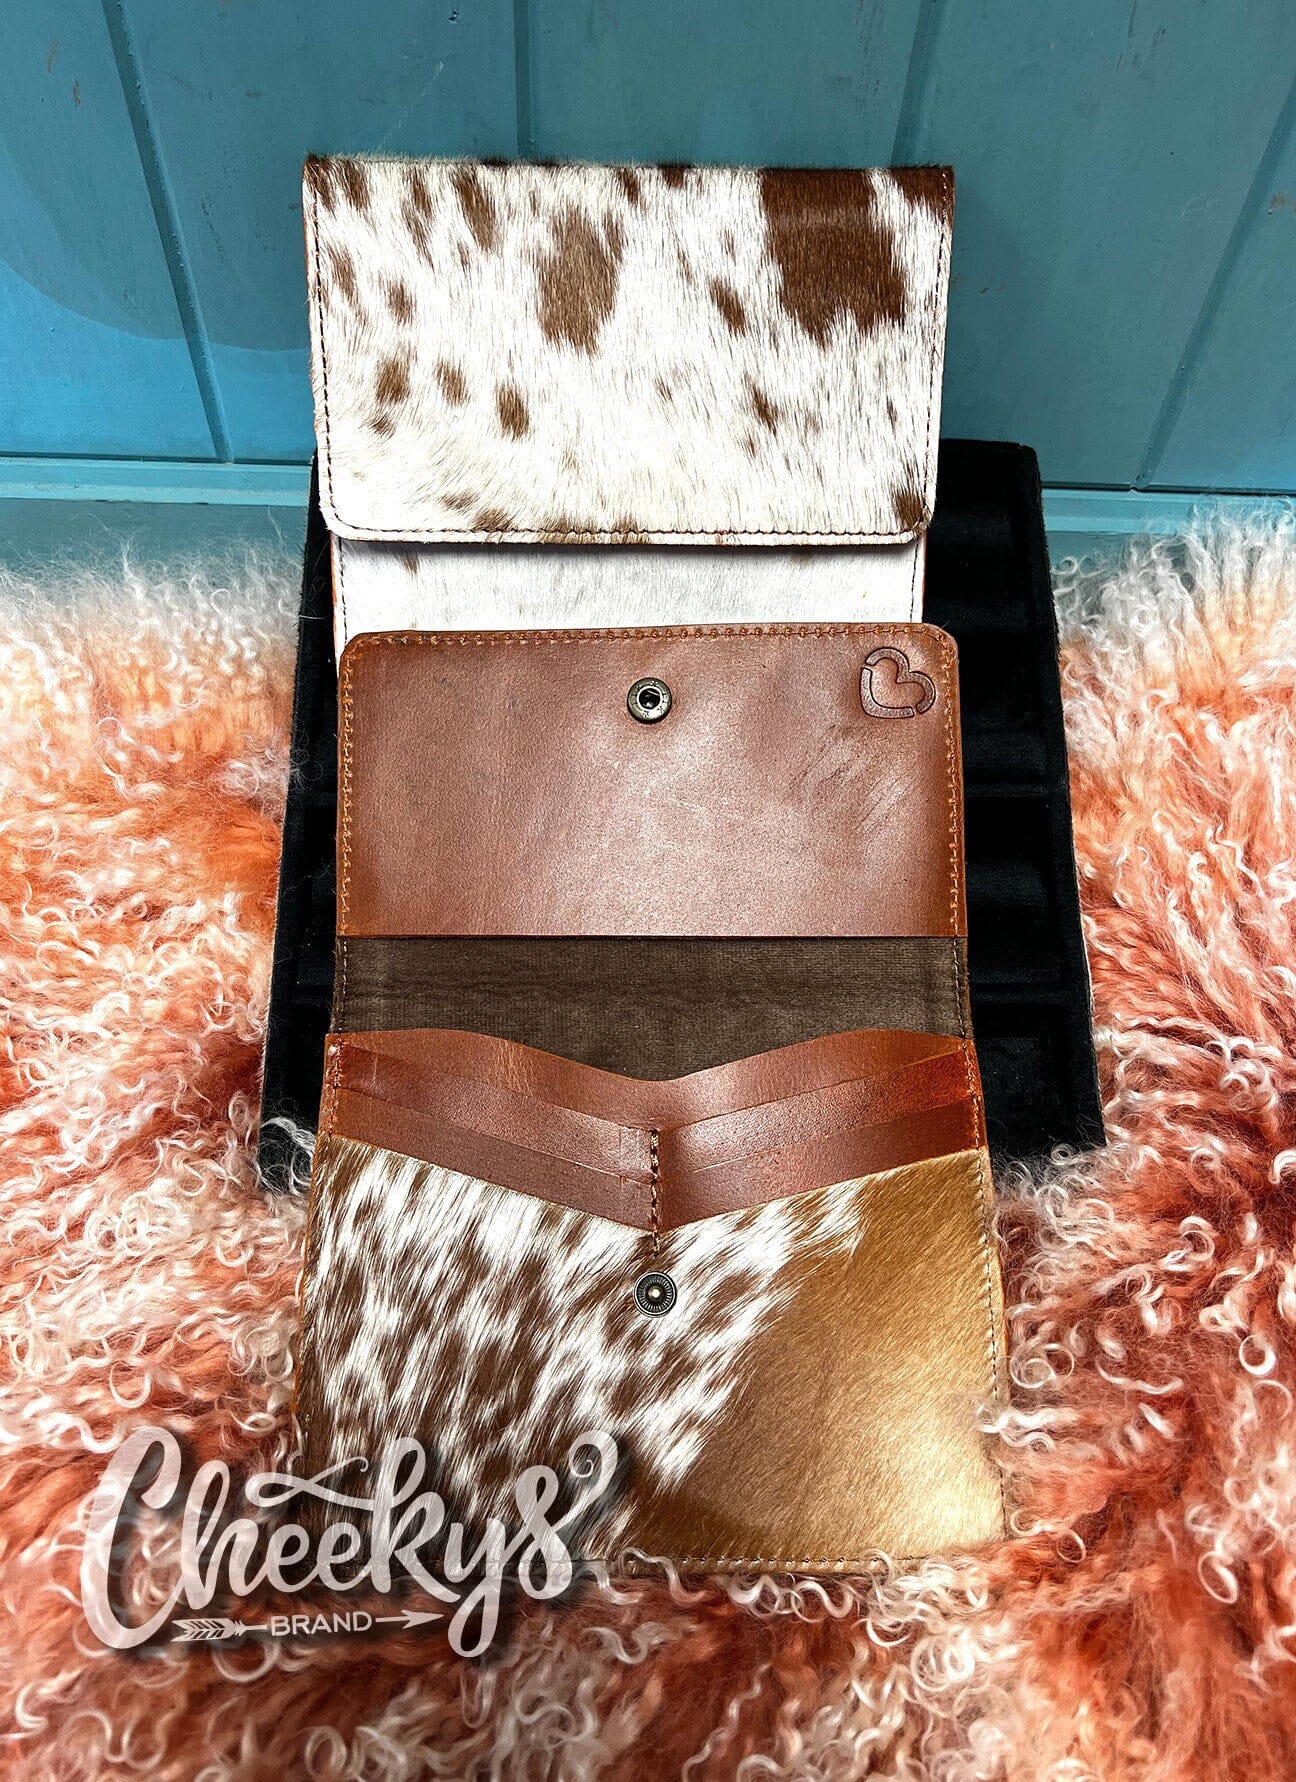 The Riley Leather Flat Wallet in Brown HOH Cheekys Brand 